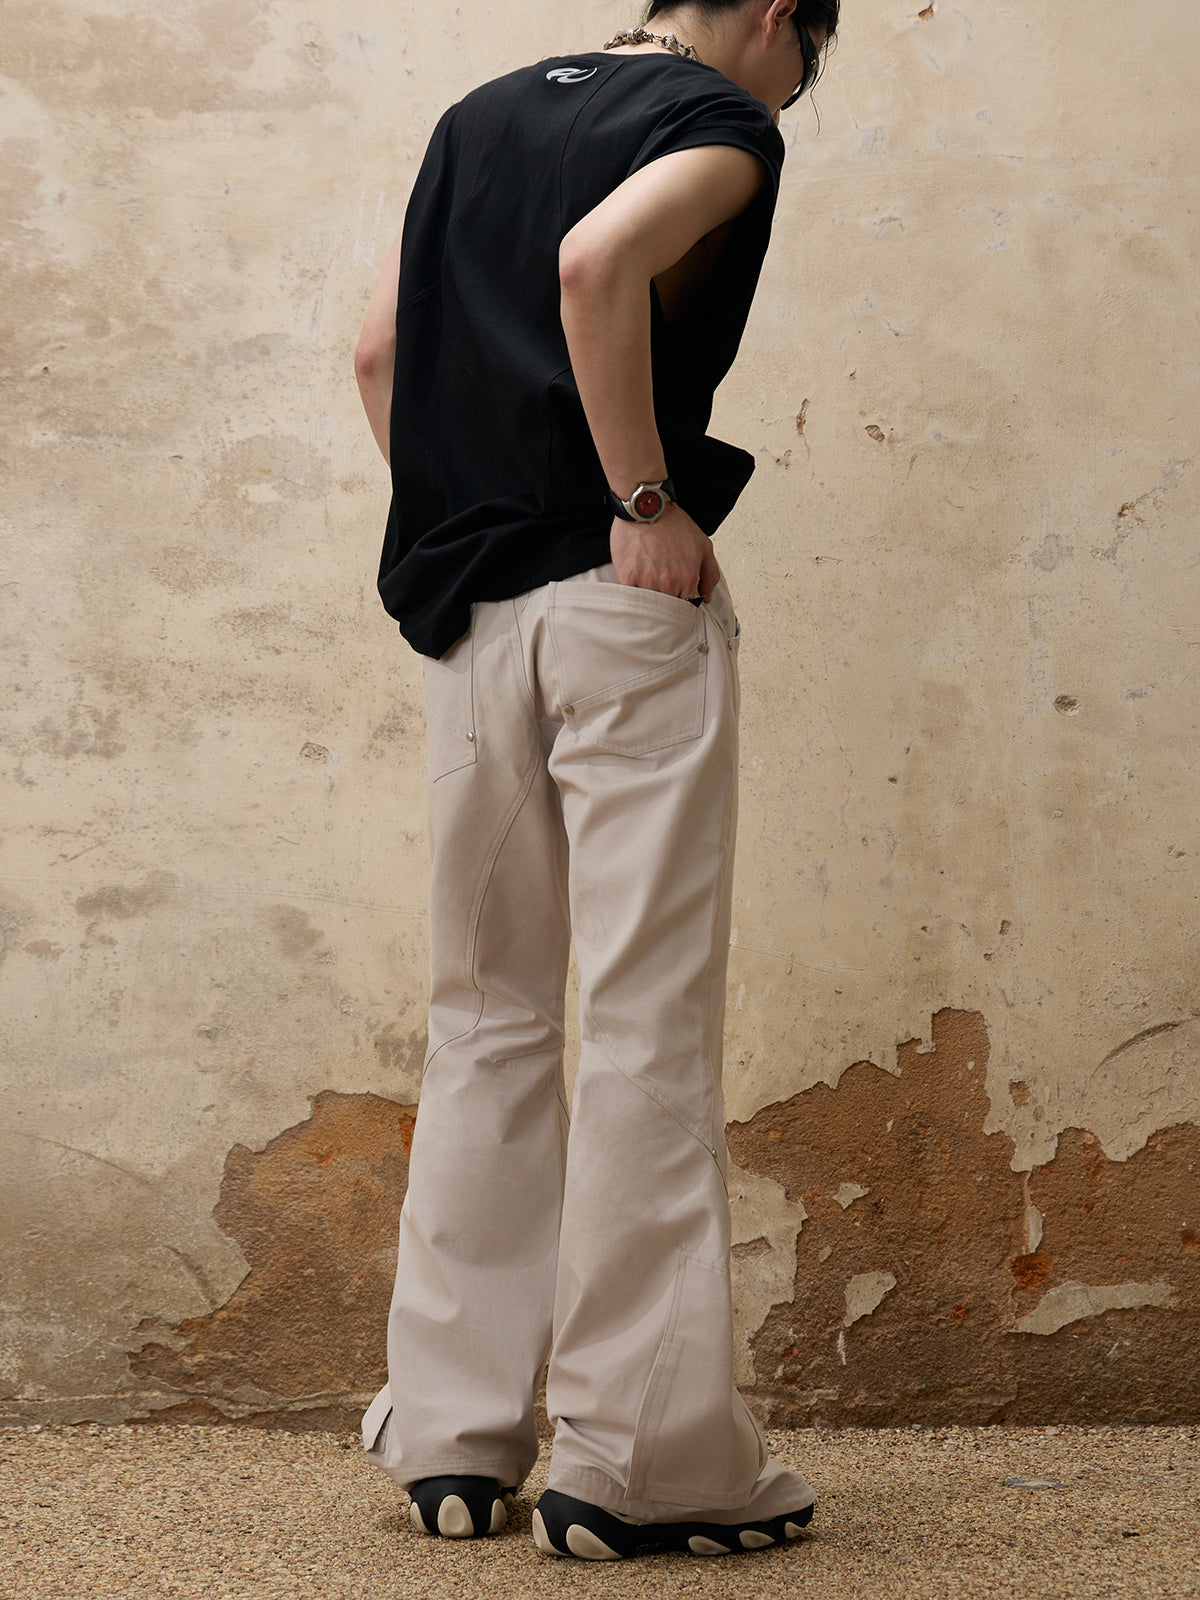 Personsoul Tight Cargo Pant